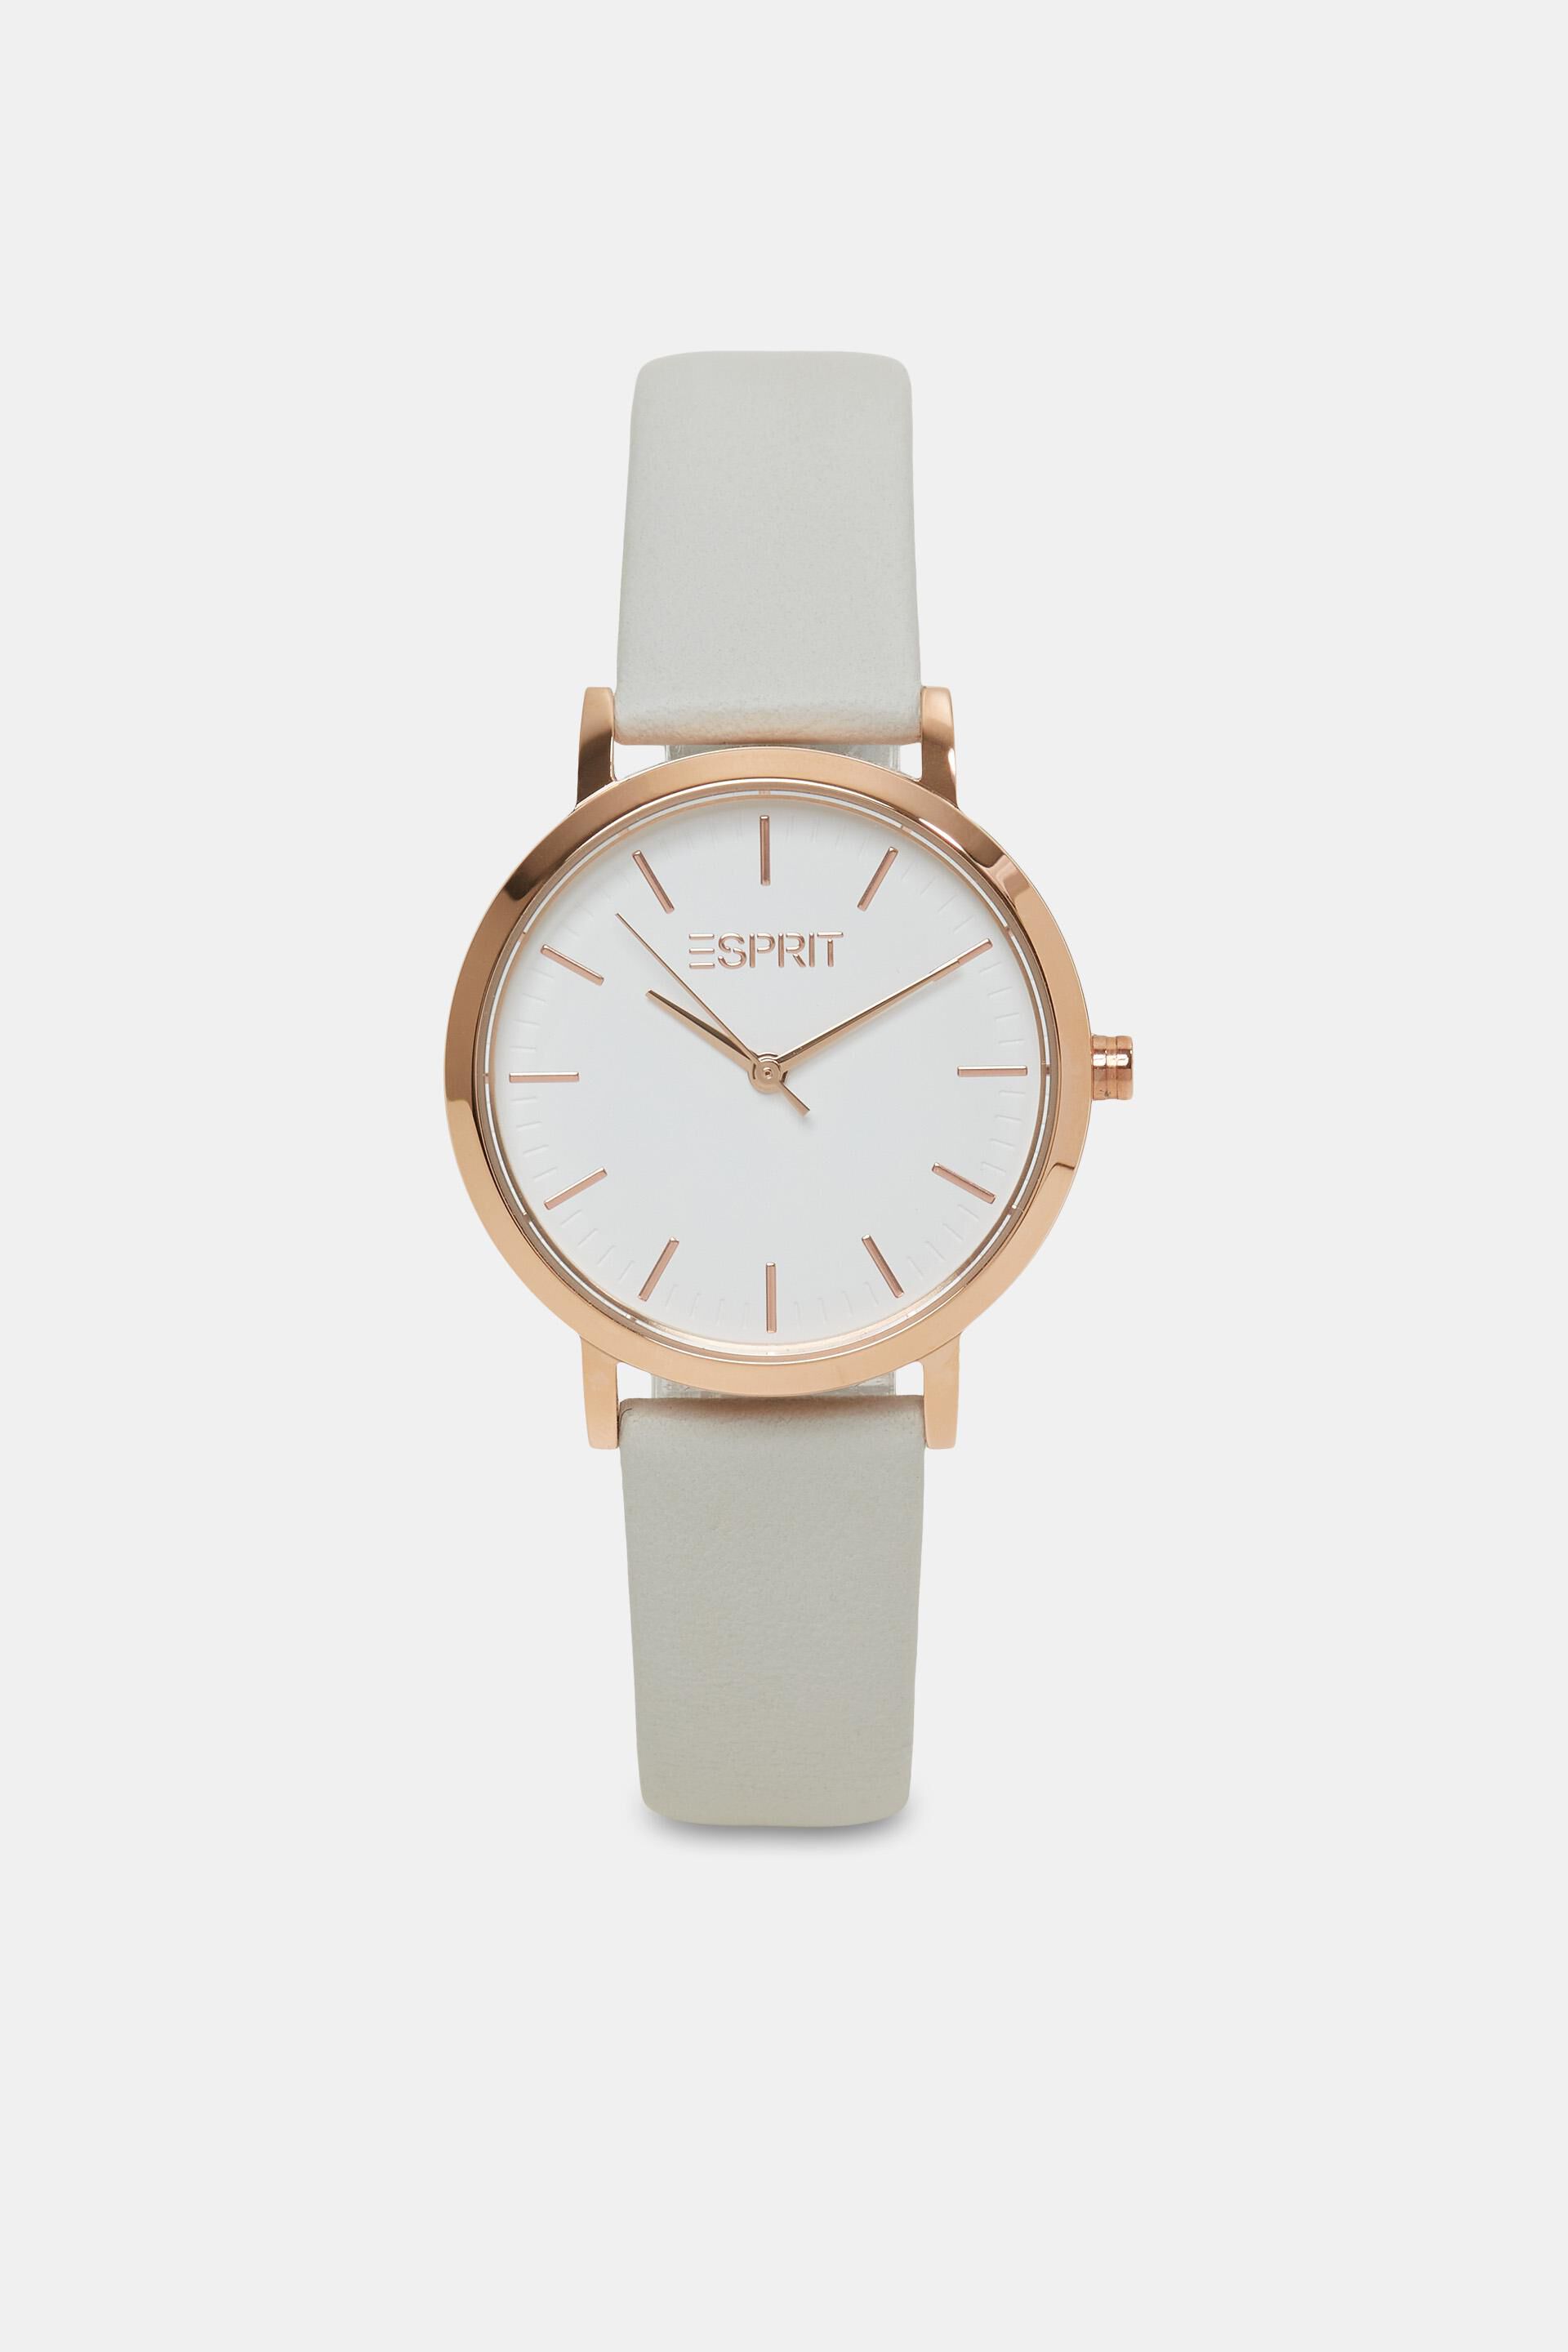 Esprit Online Store Stainless-steel watch with leather bracelet